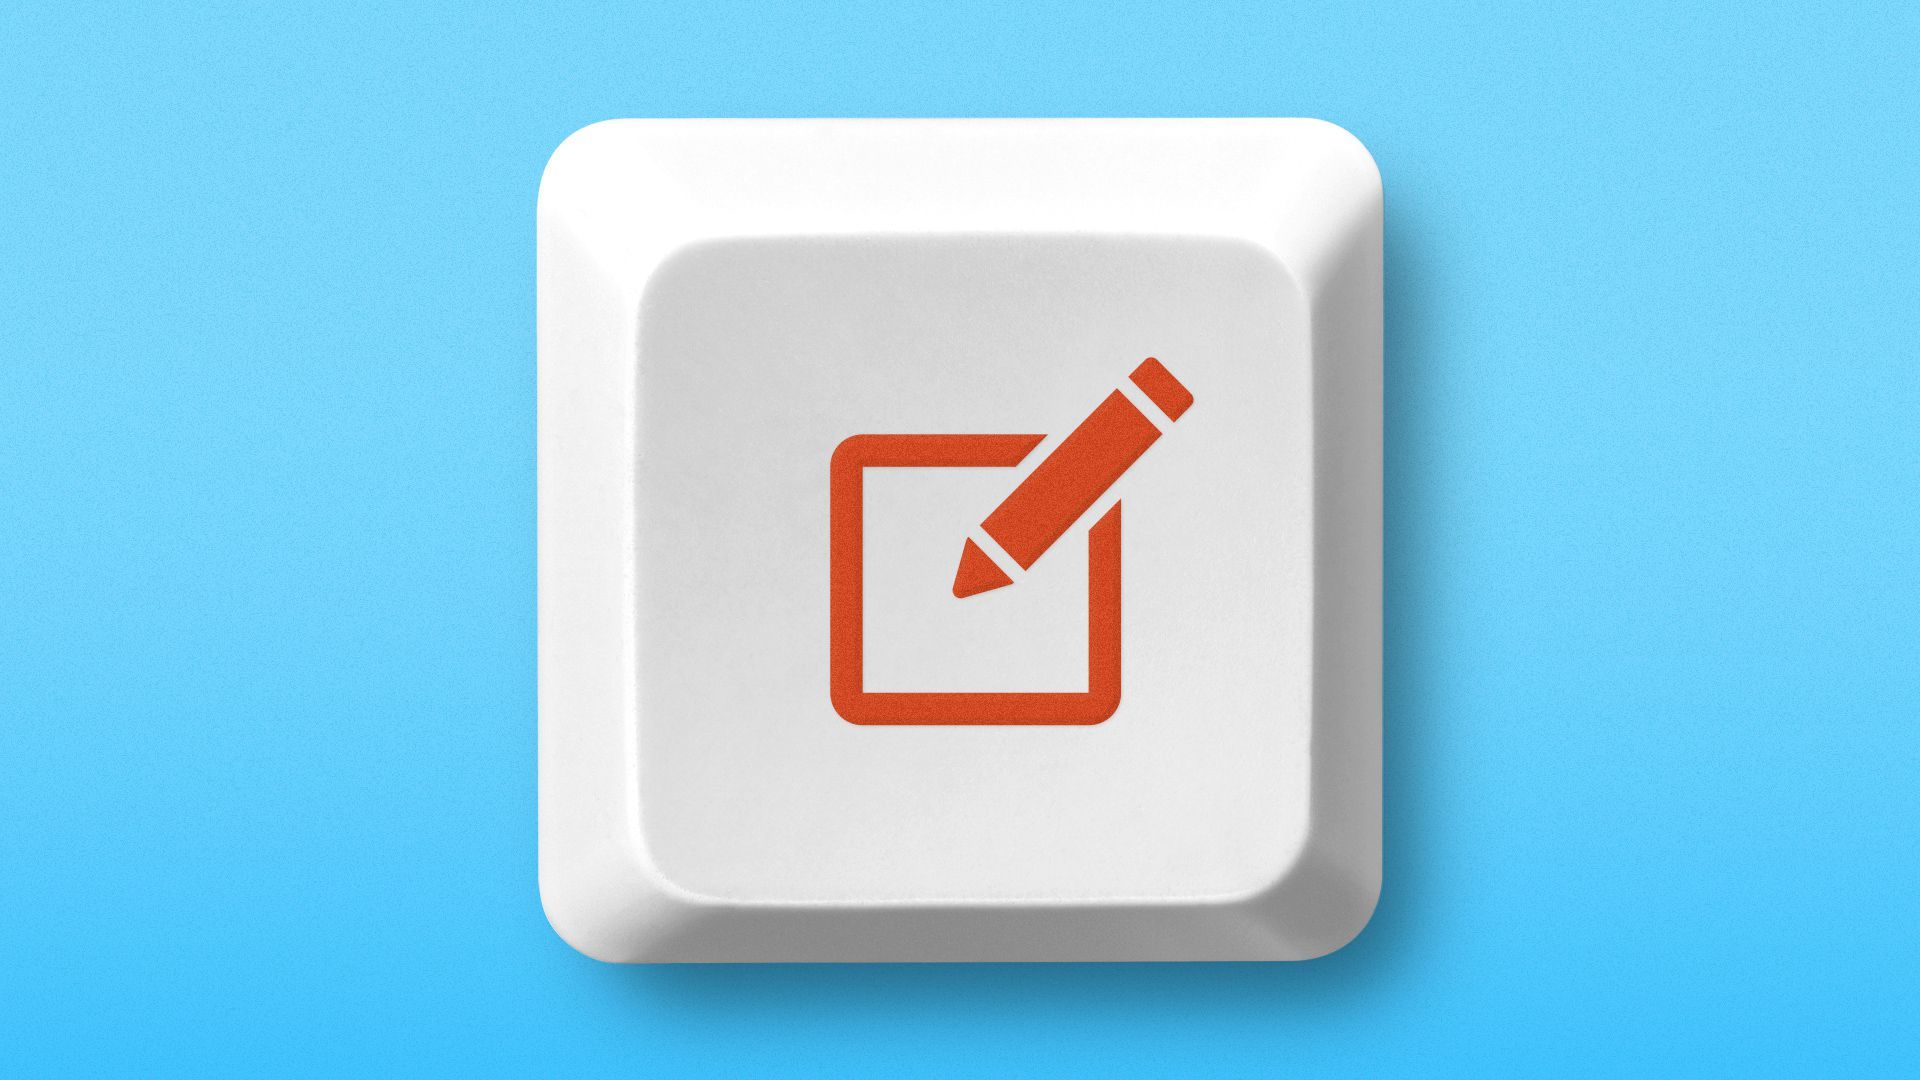 Illustration of a computer keyboard key with an edit icon.